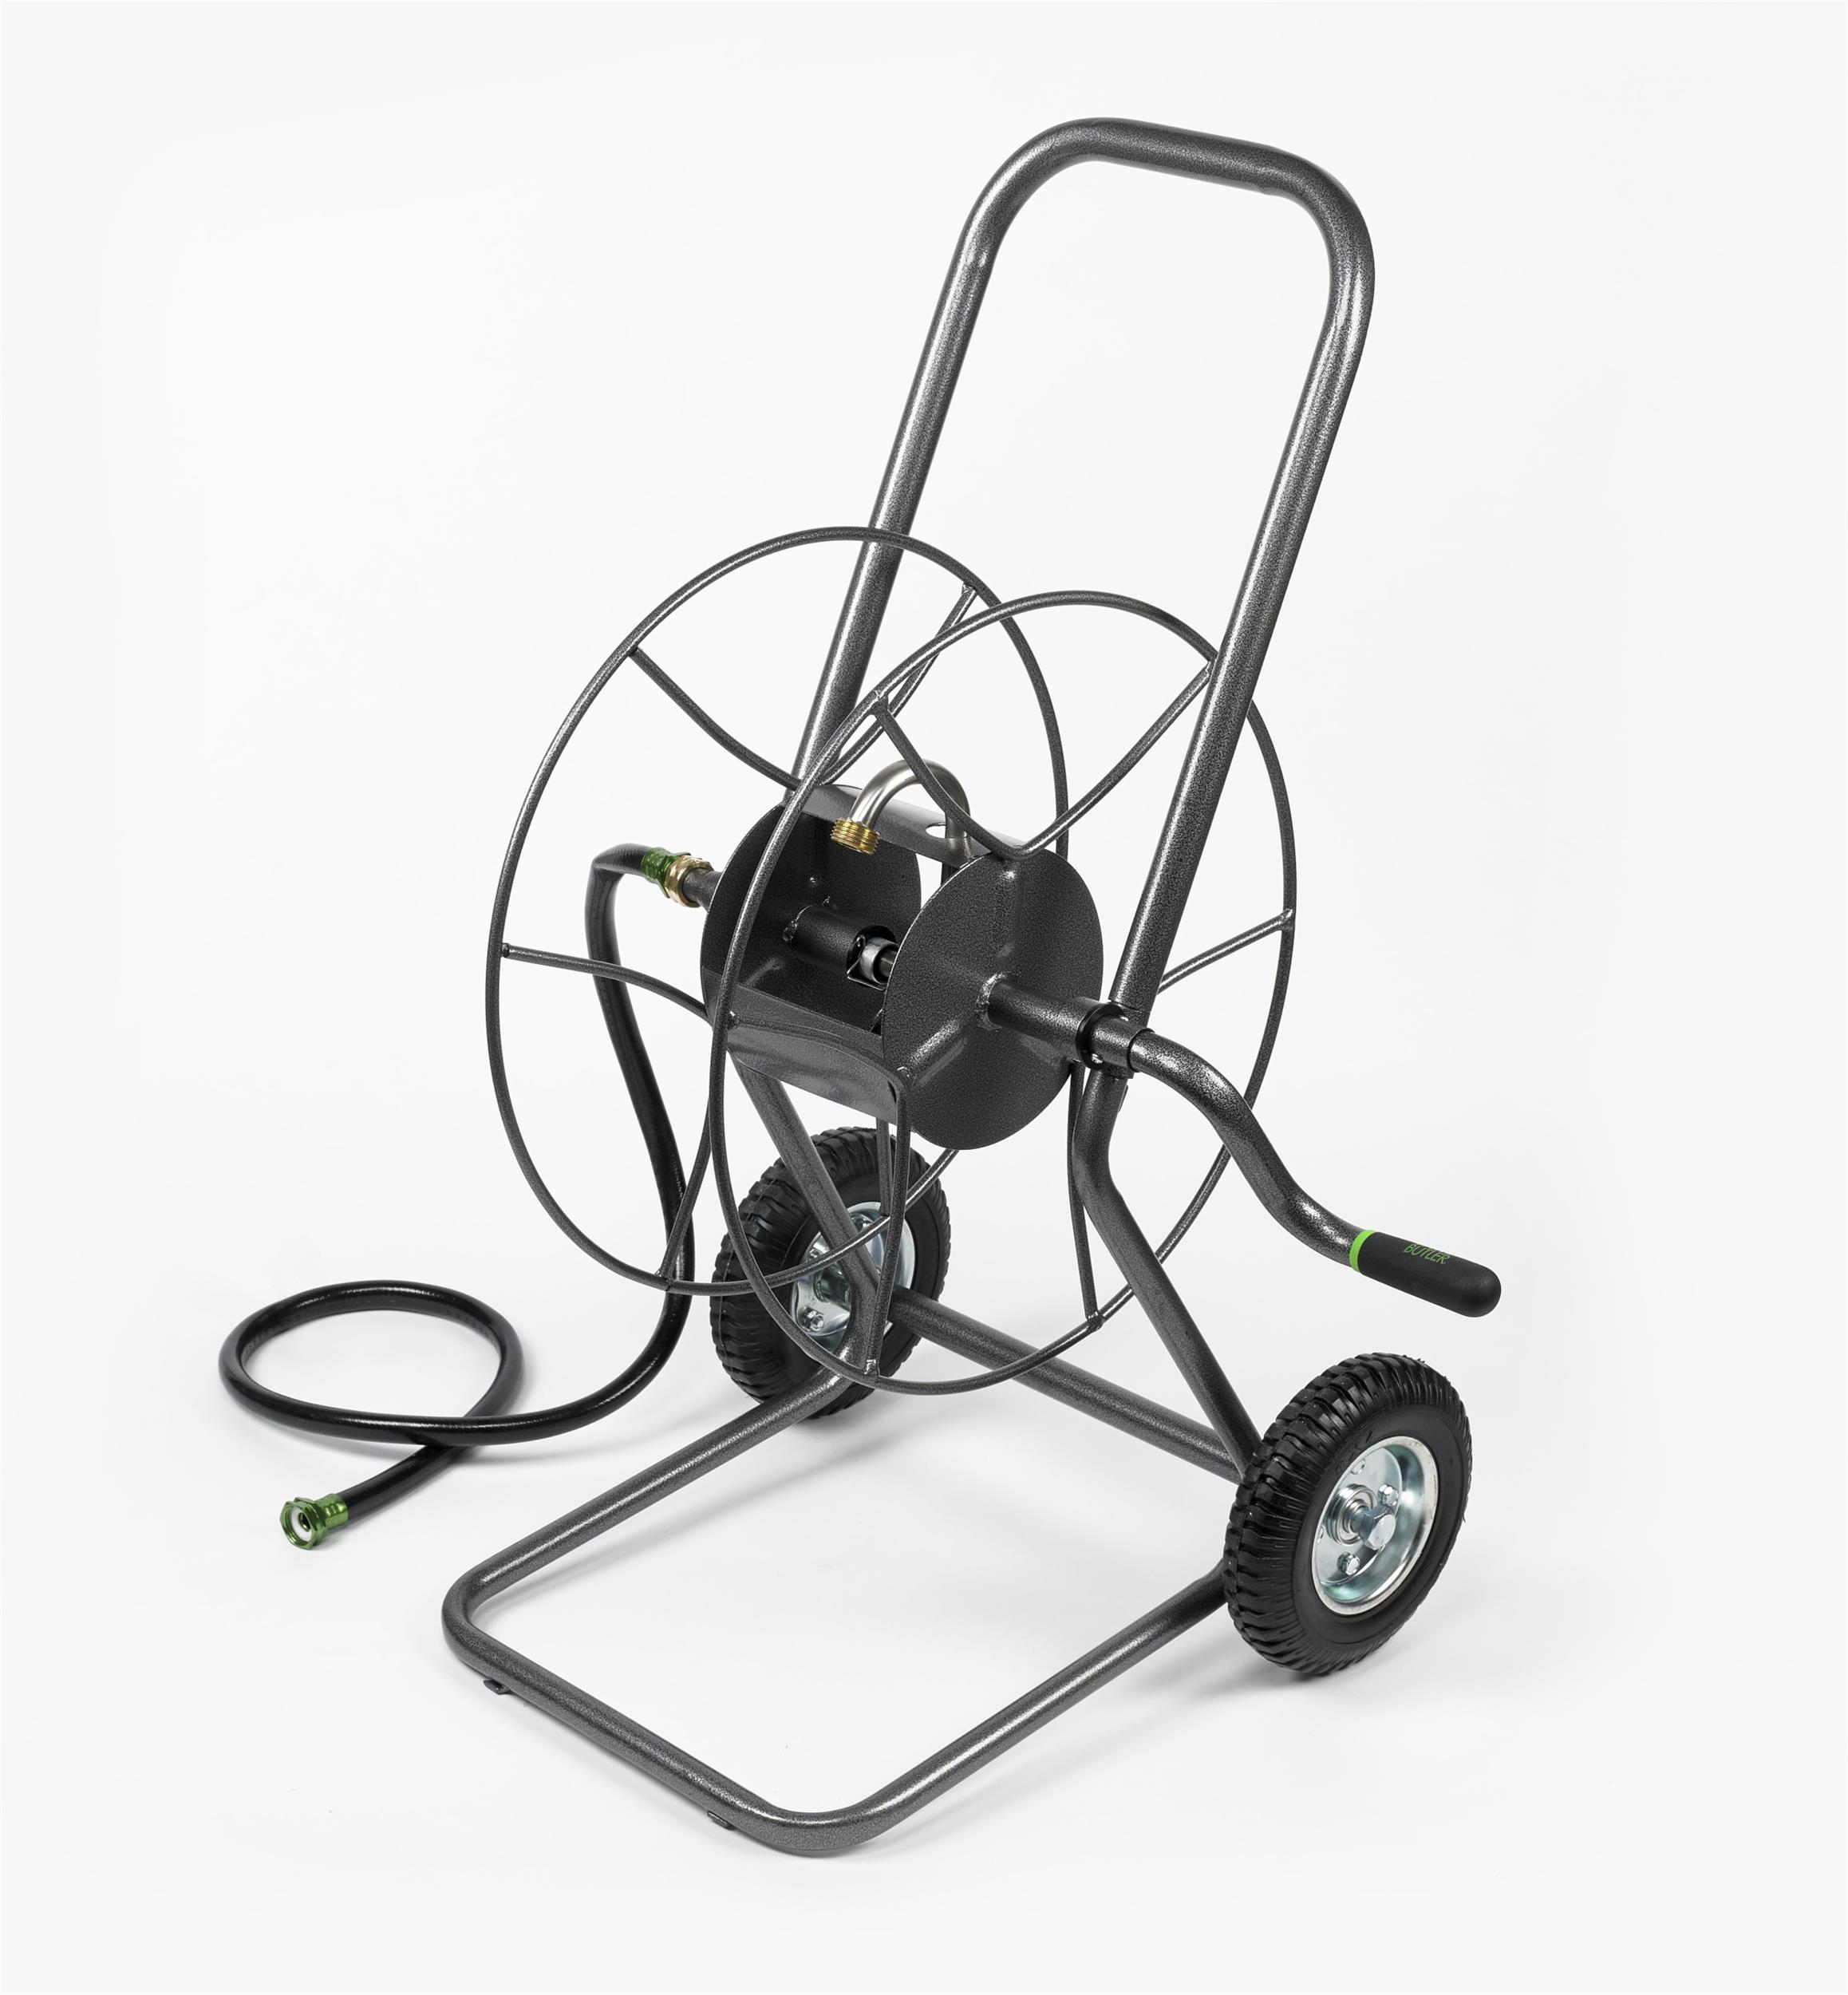  Hose Reel Cart with Wheels, Portable Heavy Duty Hose Reel and Garden  Hose Holder, with Storage Box Design,for Gardens, Lawns and Outdoor,with  Pipe : Patio, Lawn & Garden